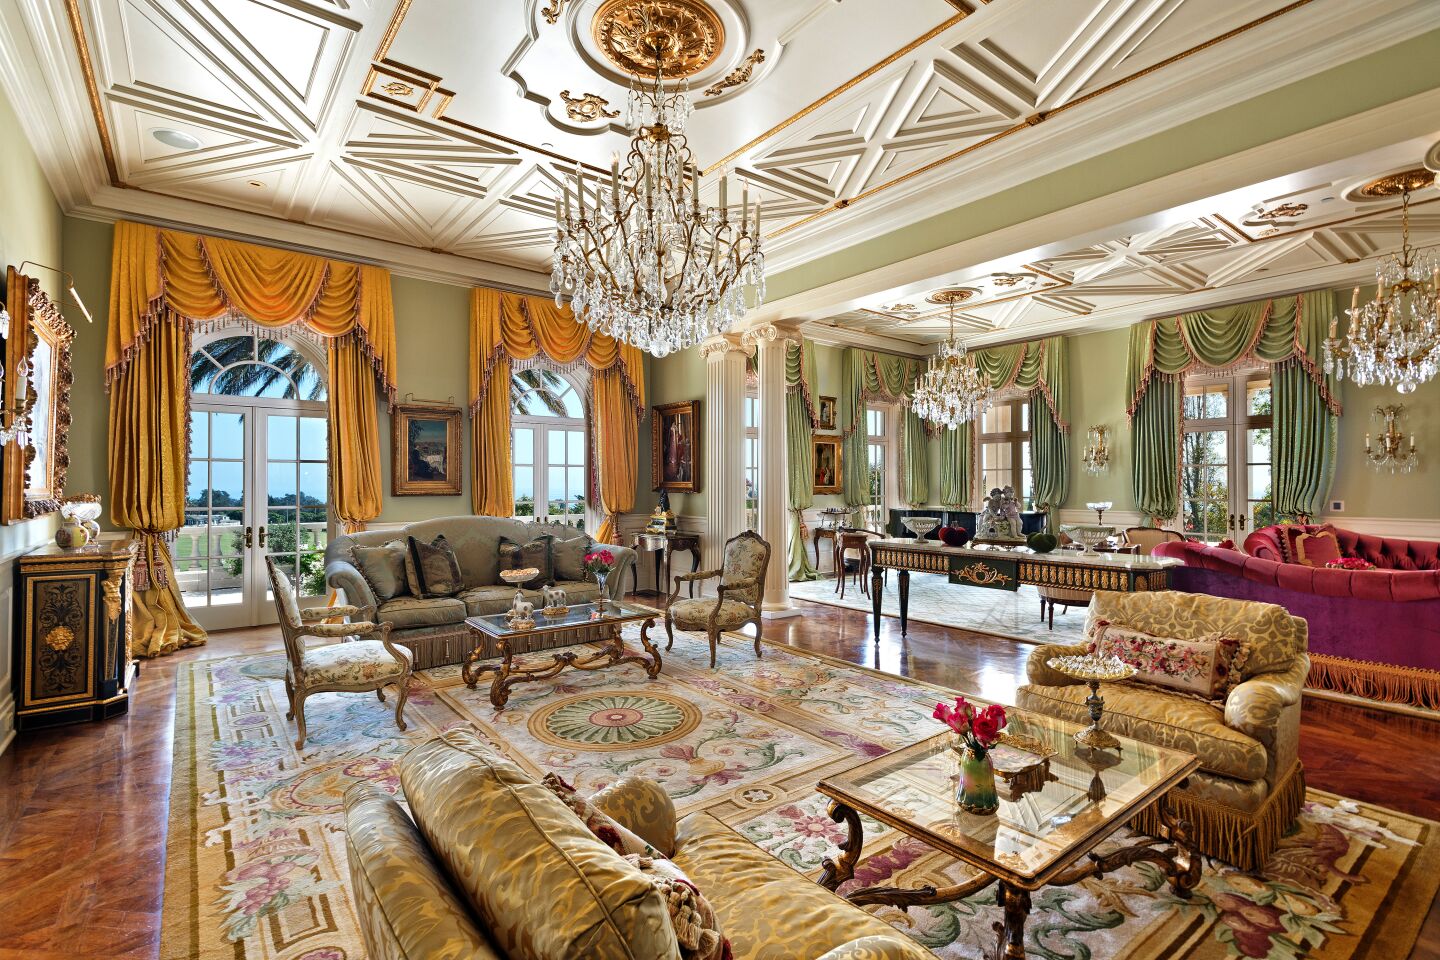 The mansion is full of formal spaces with crystal chandeliers, intricate ceilings, oversize drapes and mahogany finishes.